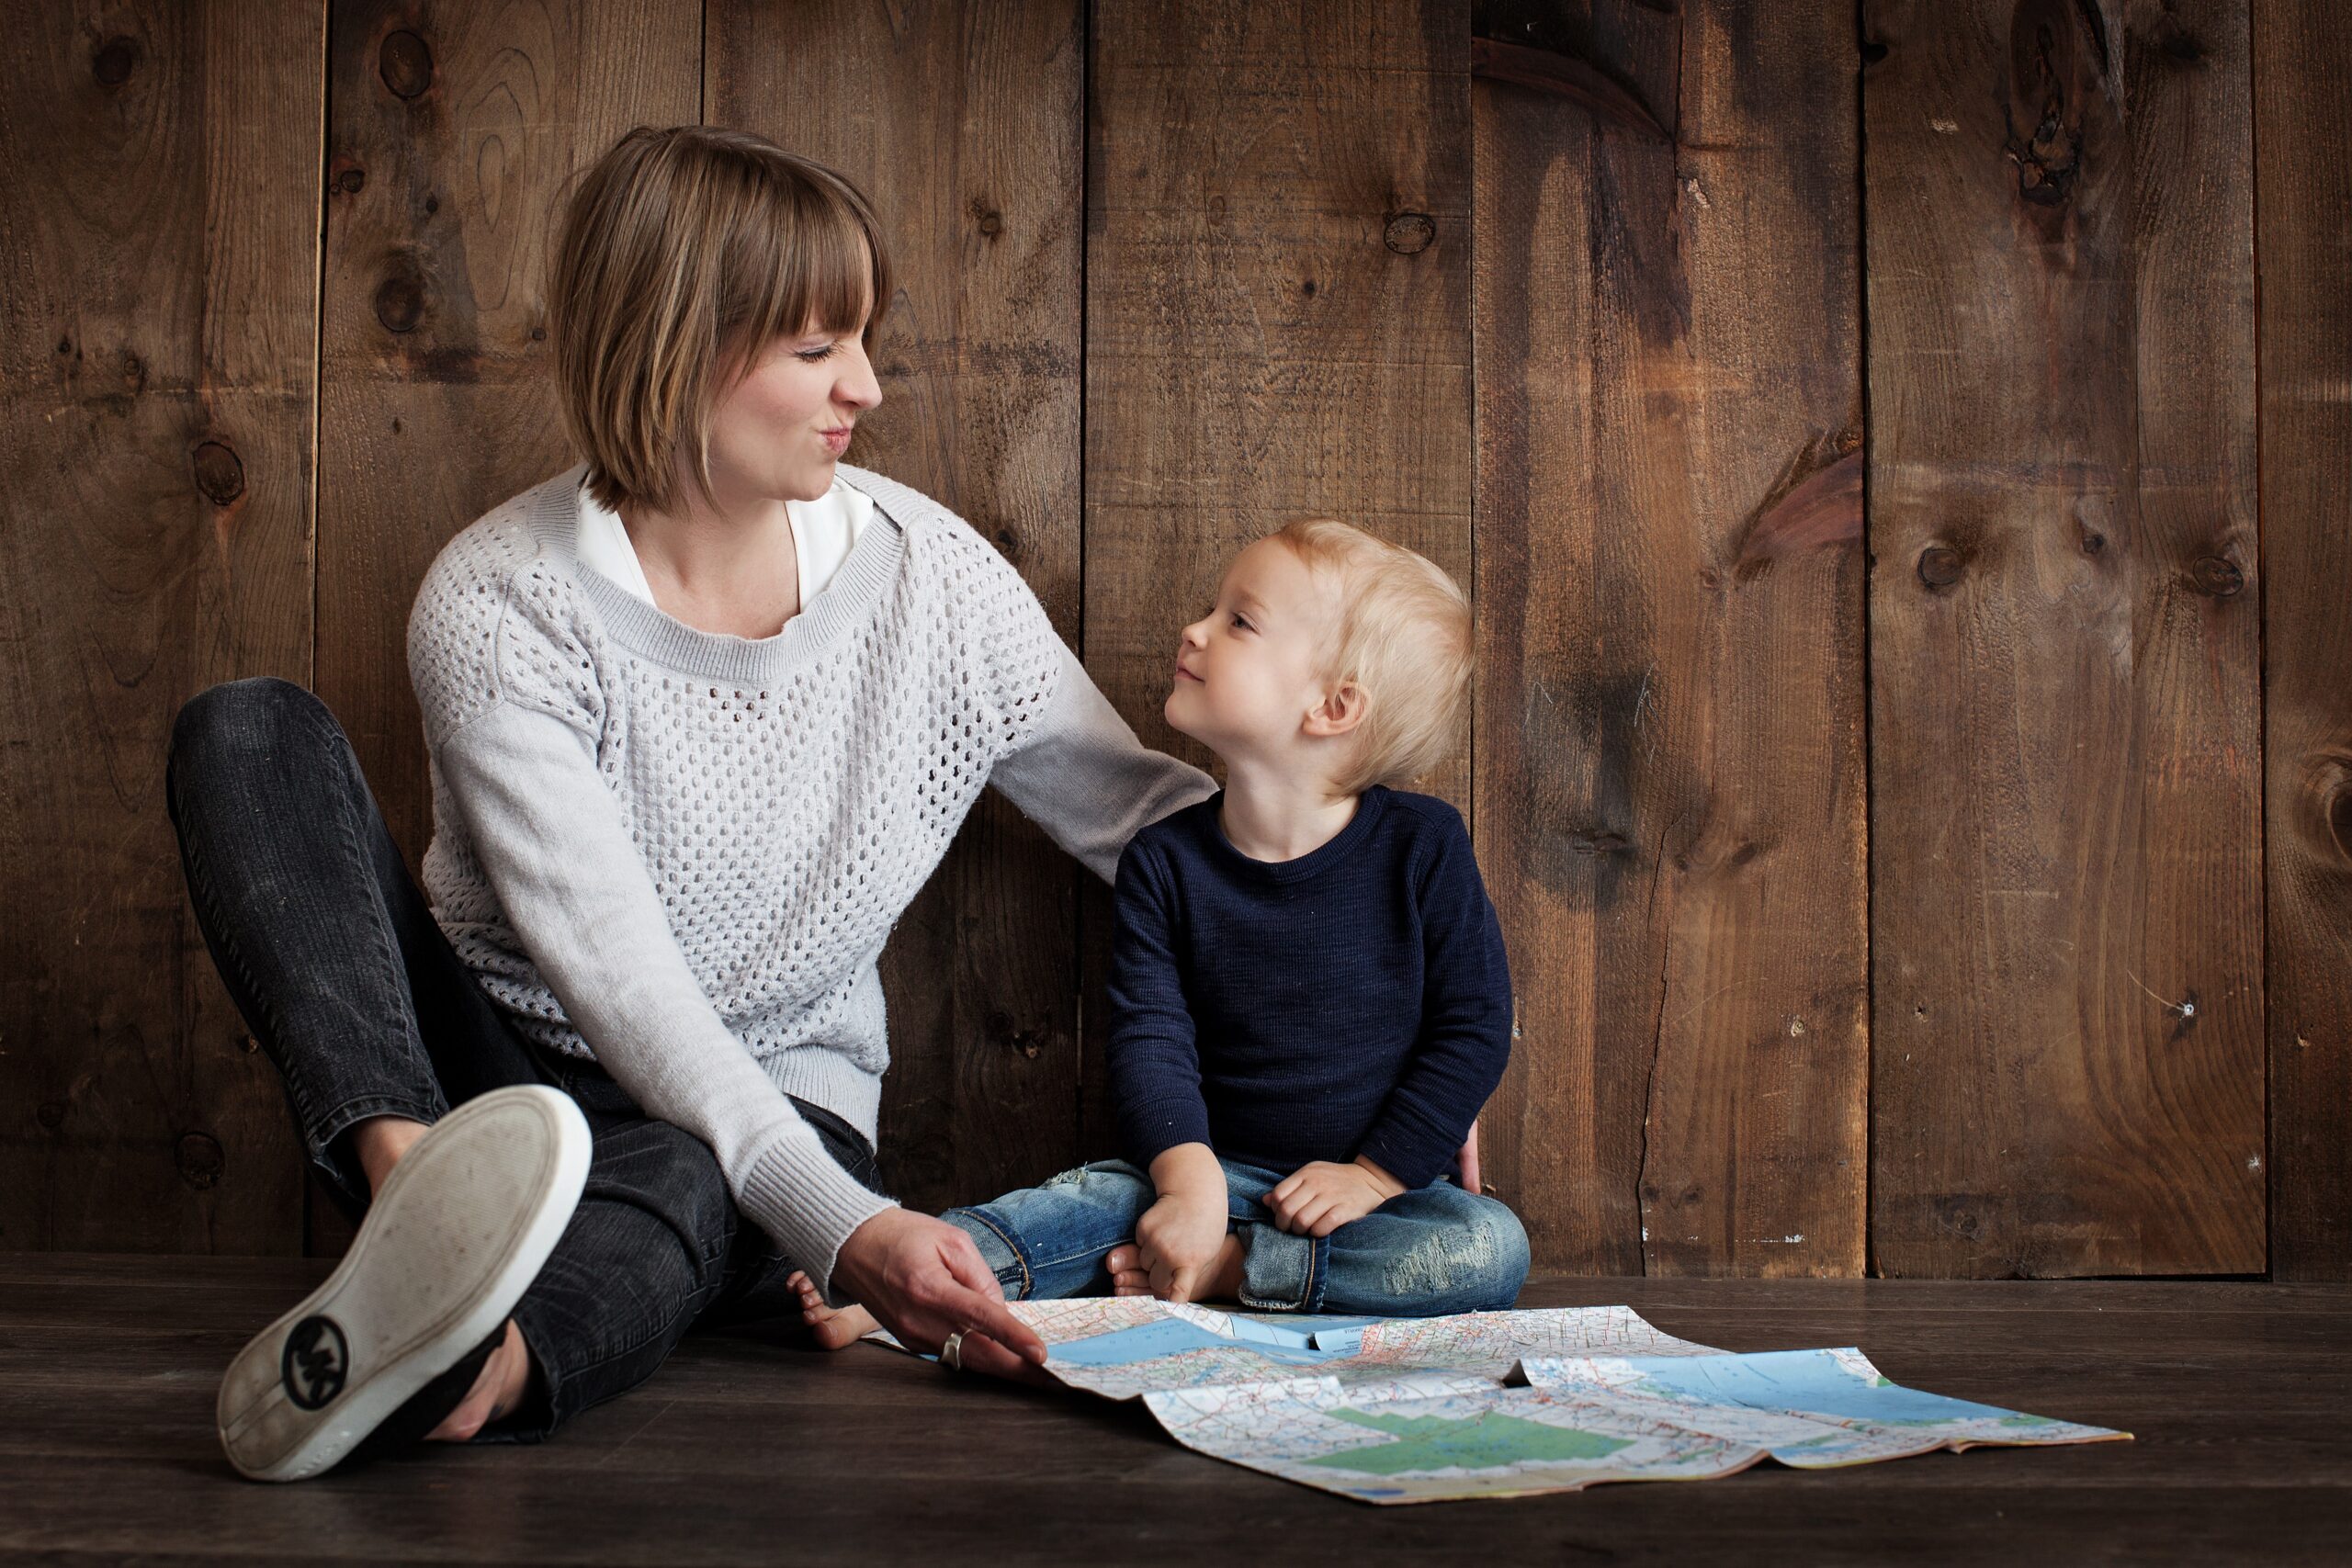 A mother and her young son sit on a wooden floor, gazing at each other with smiles while surrounded by spread out maps, engaged in permanency planning together.